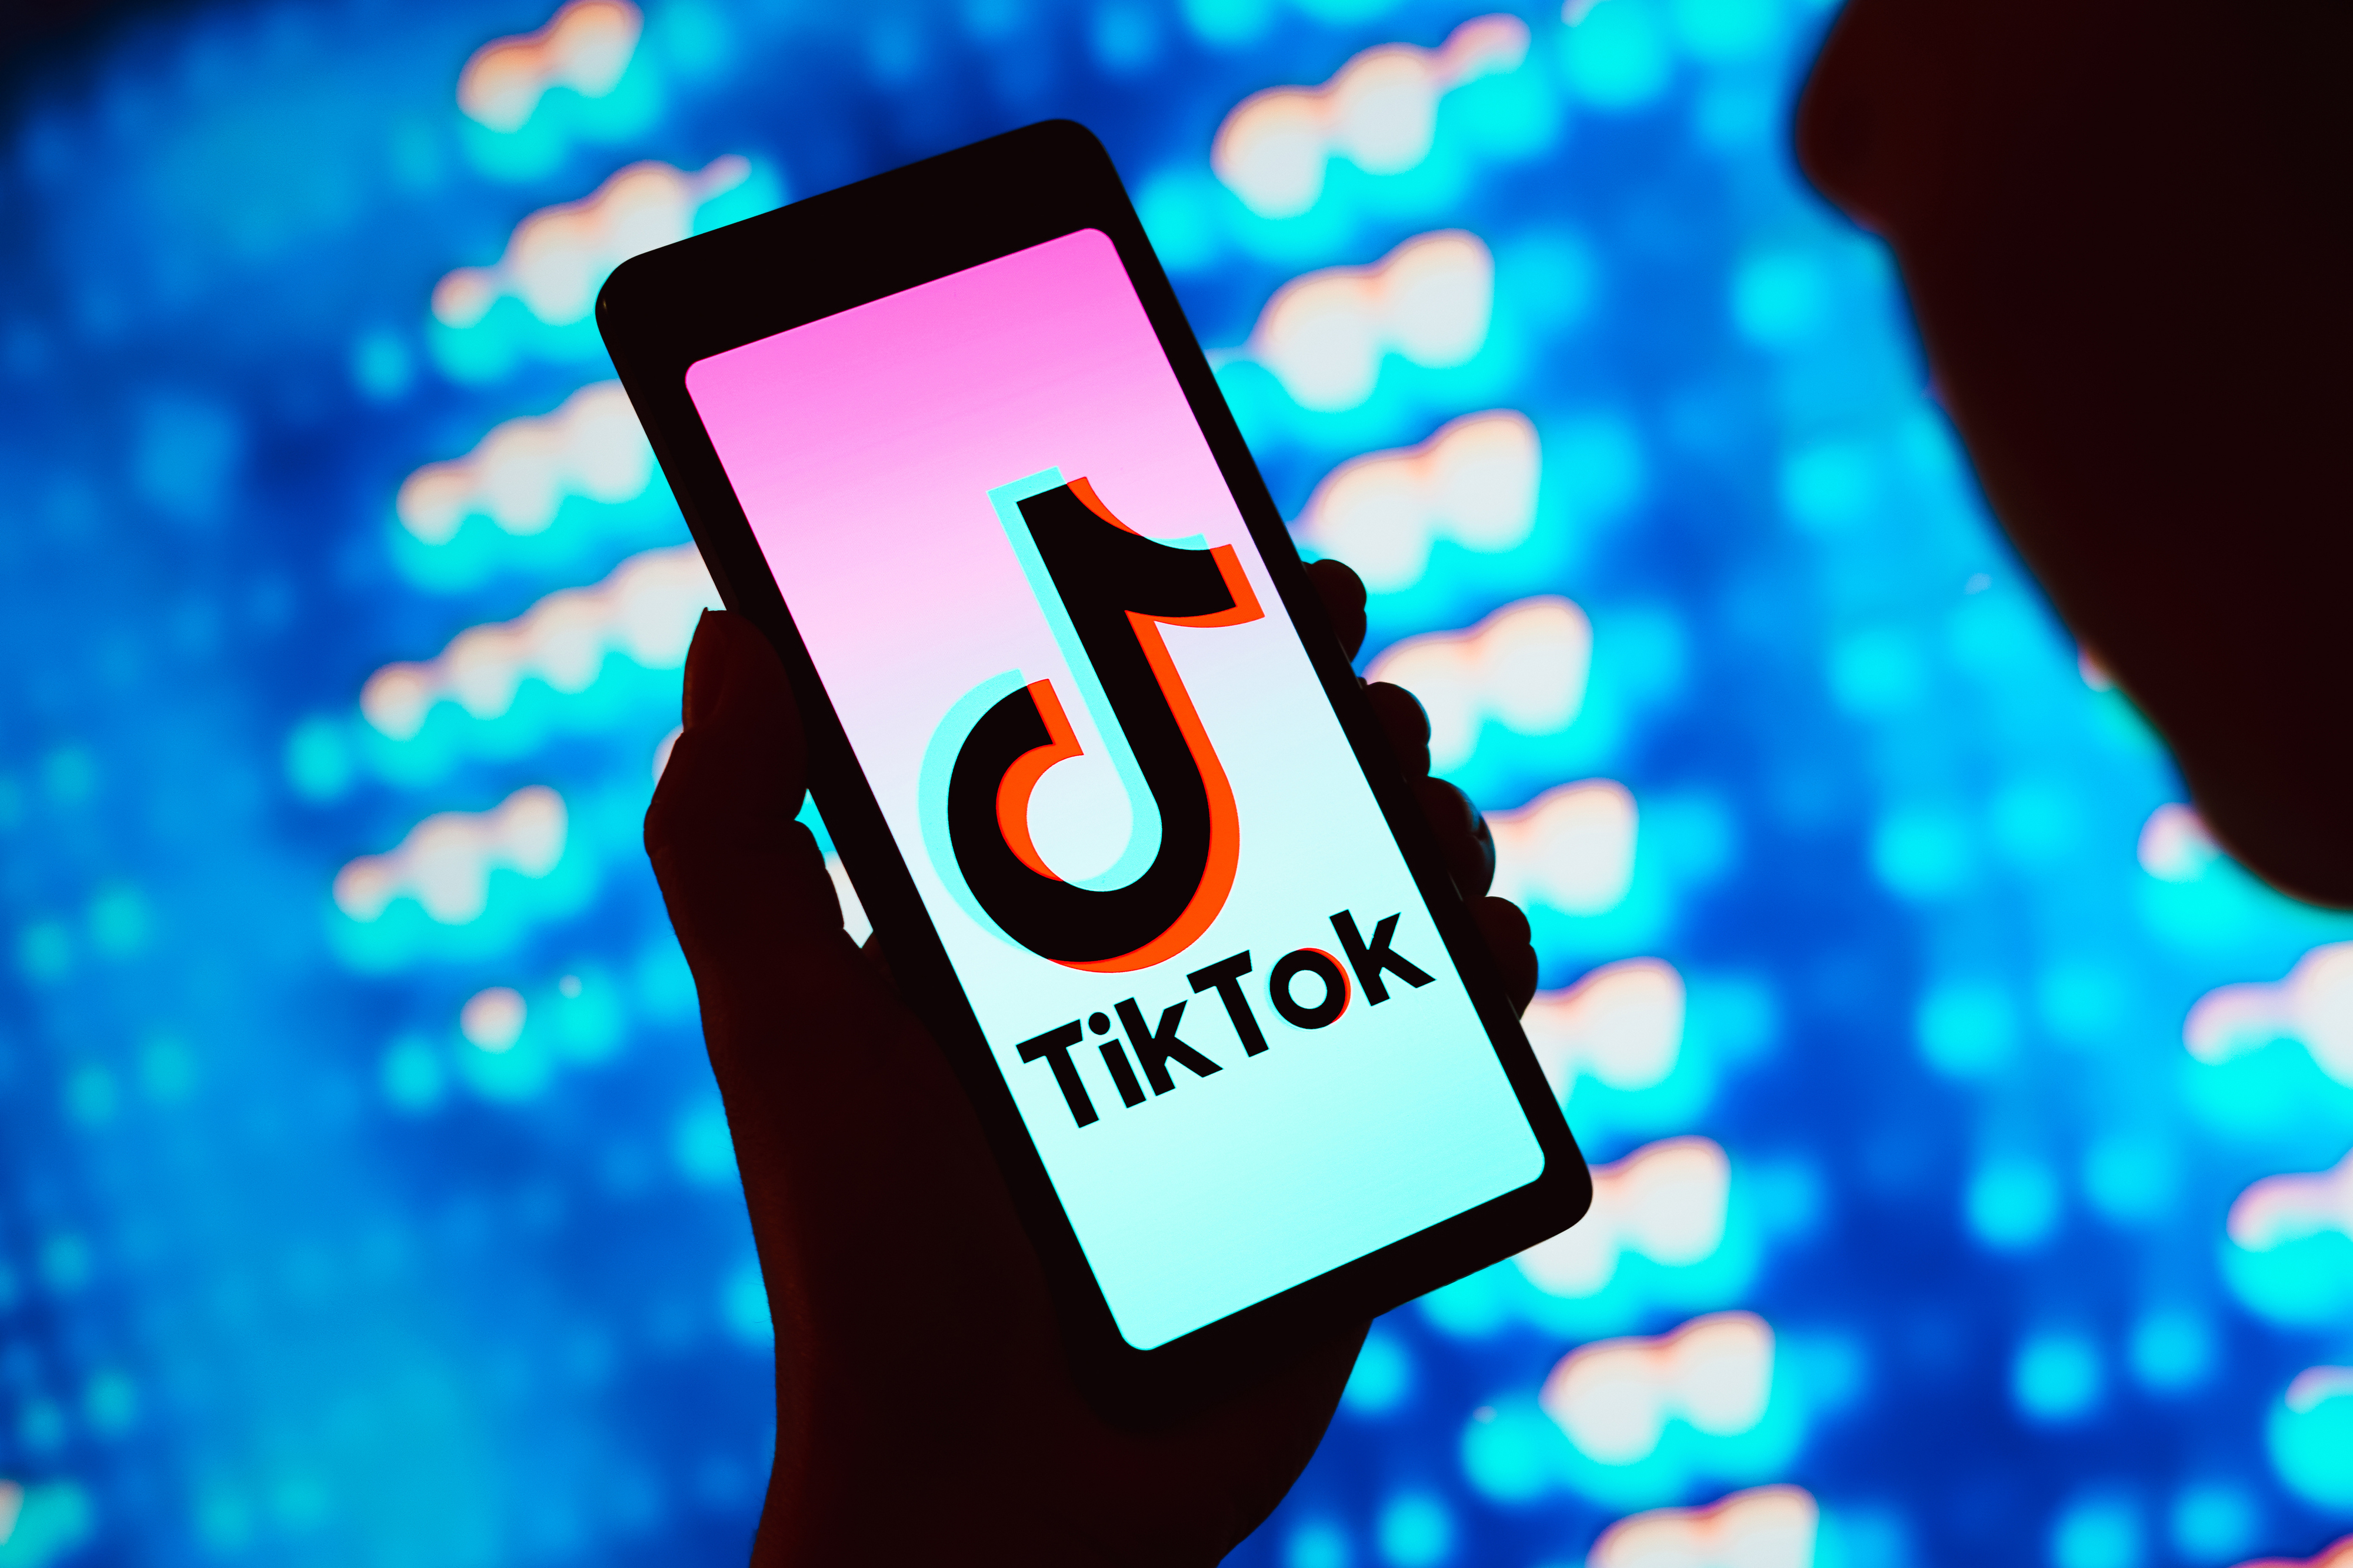 Silhouetted person holding a smartphone with the TikTok app logo on the screen, illuminated background